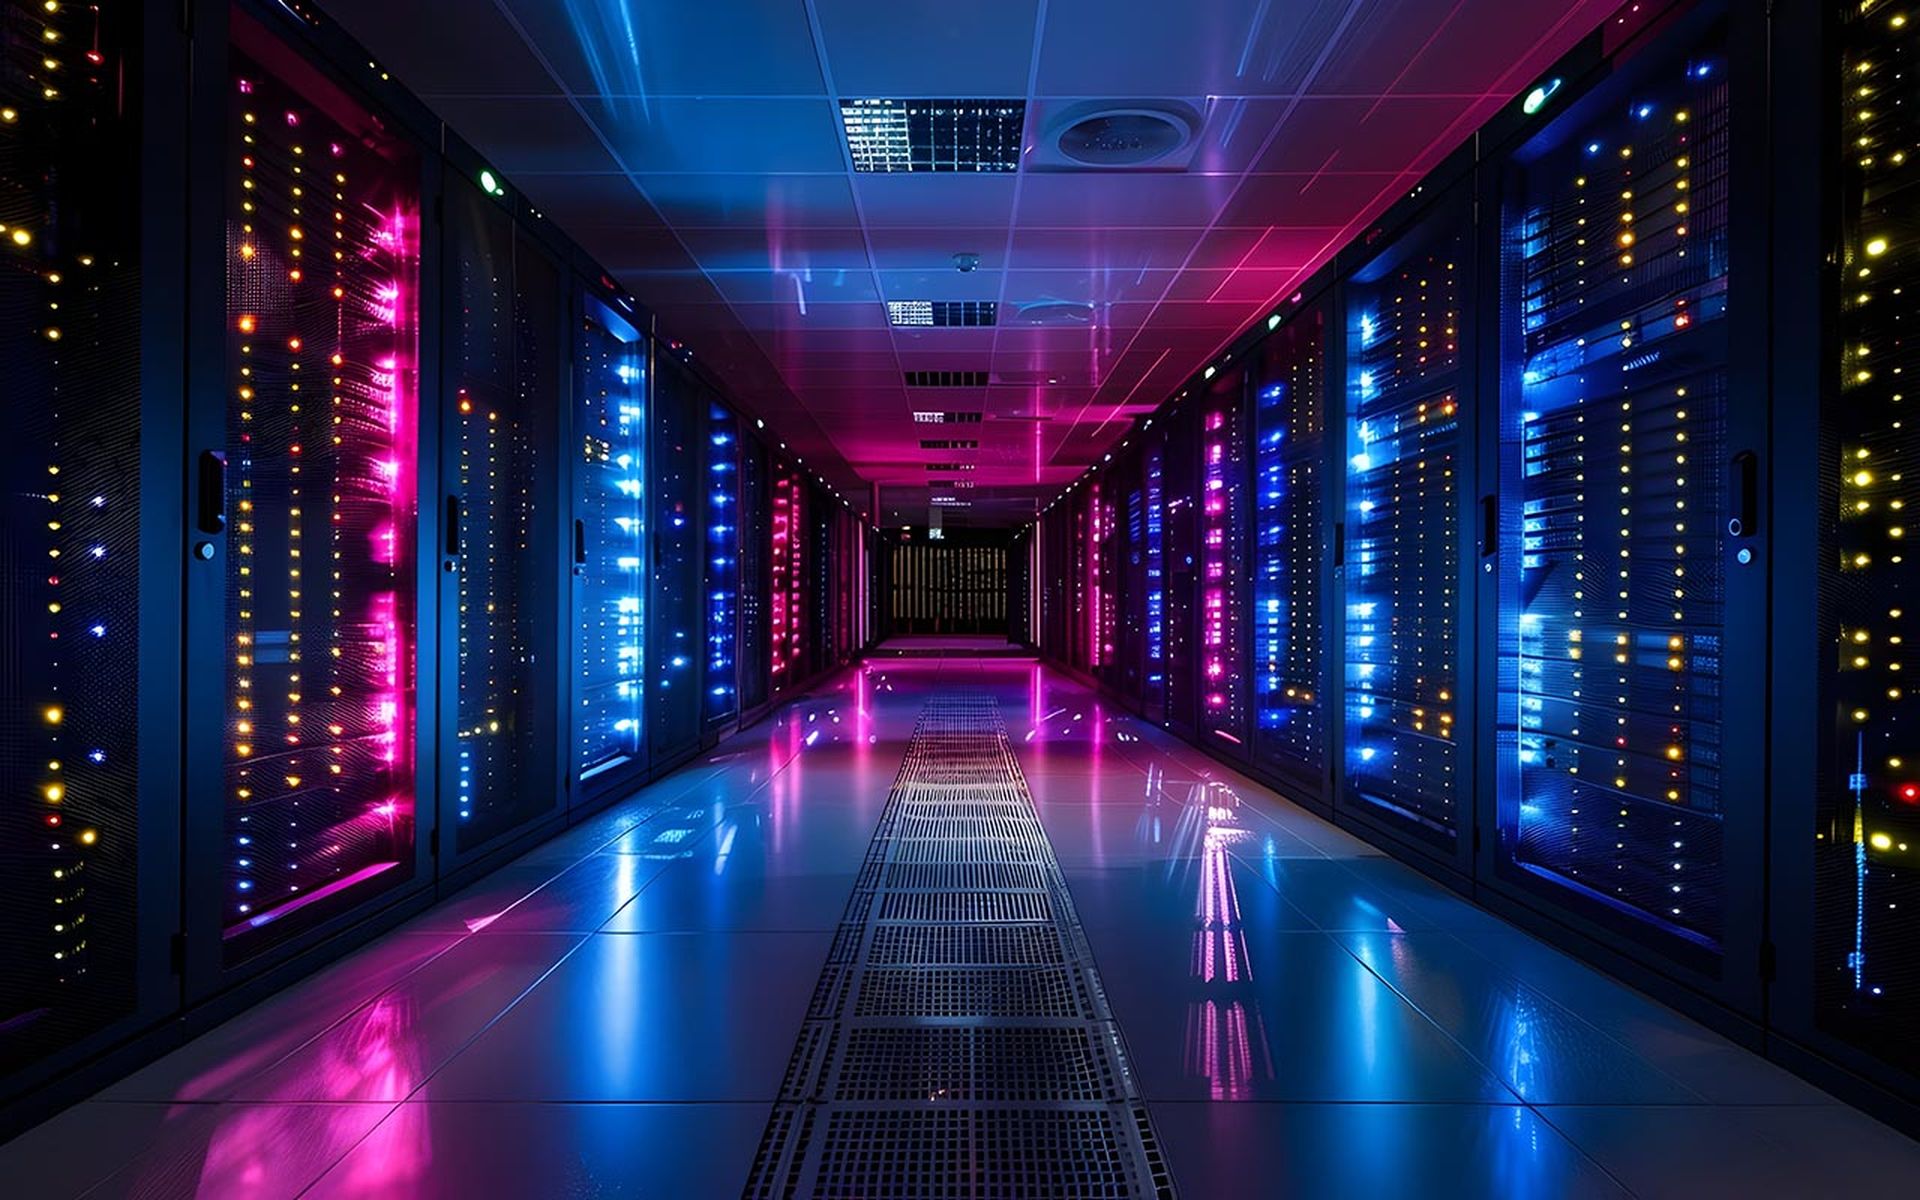 A spotless, well-organized server room houses state-of-the-art IT equipment, emphasizing the cutting-edge technology and connectivity that drives modern businesses. Rows of racks filled with